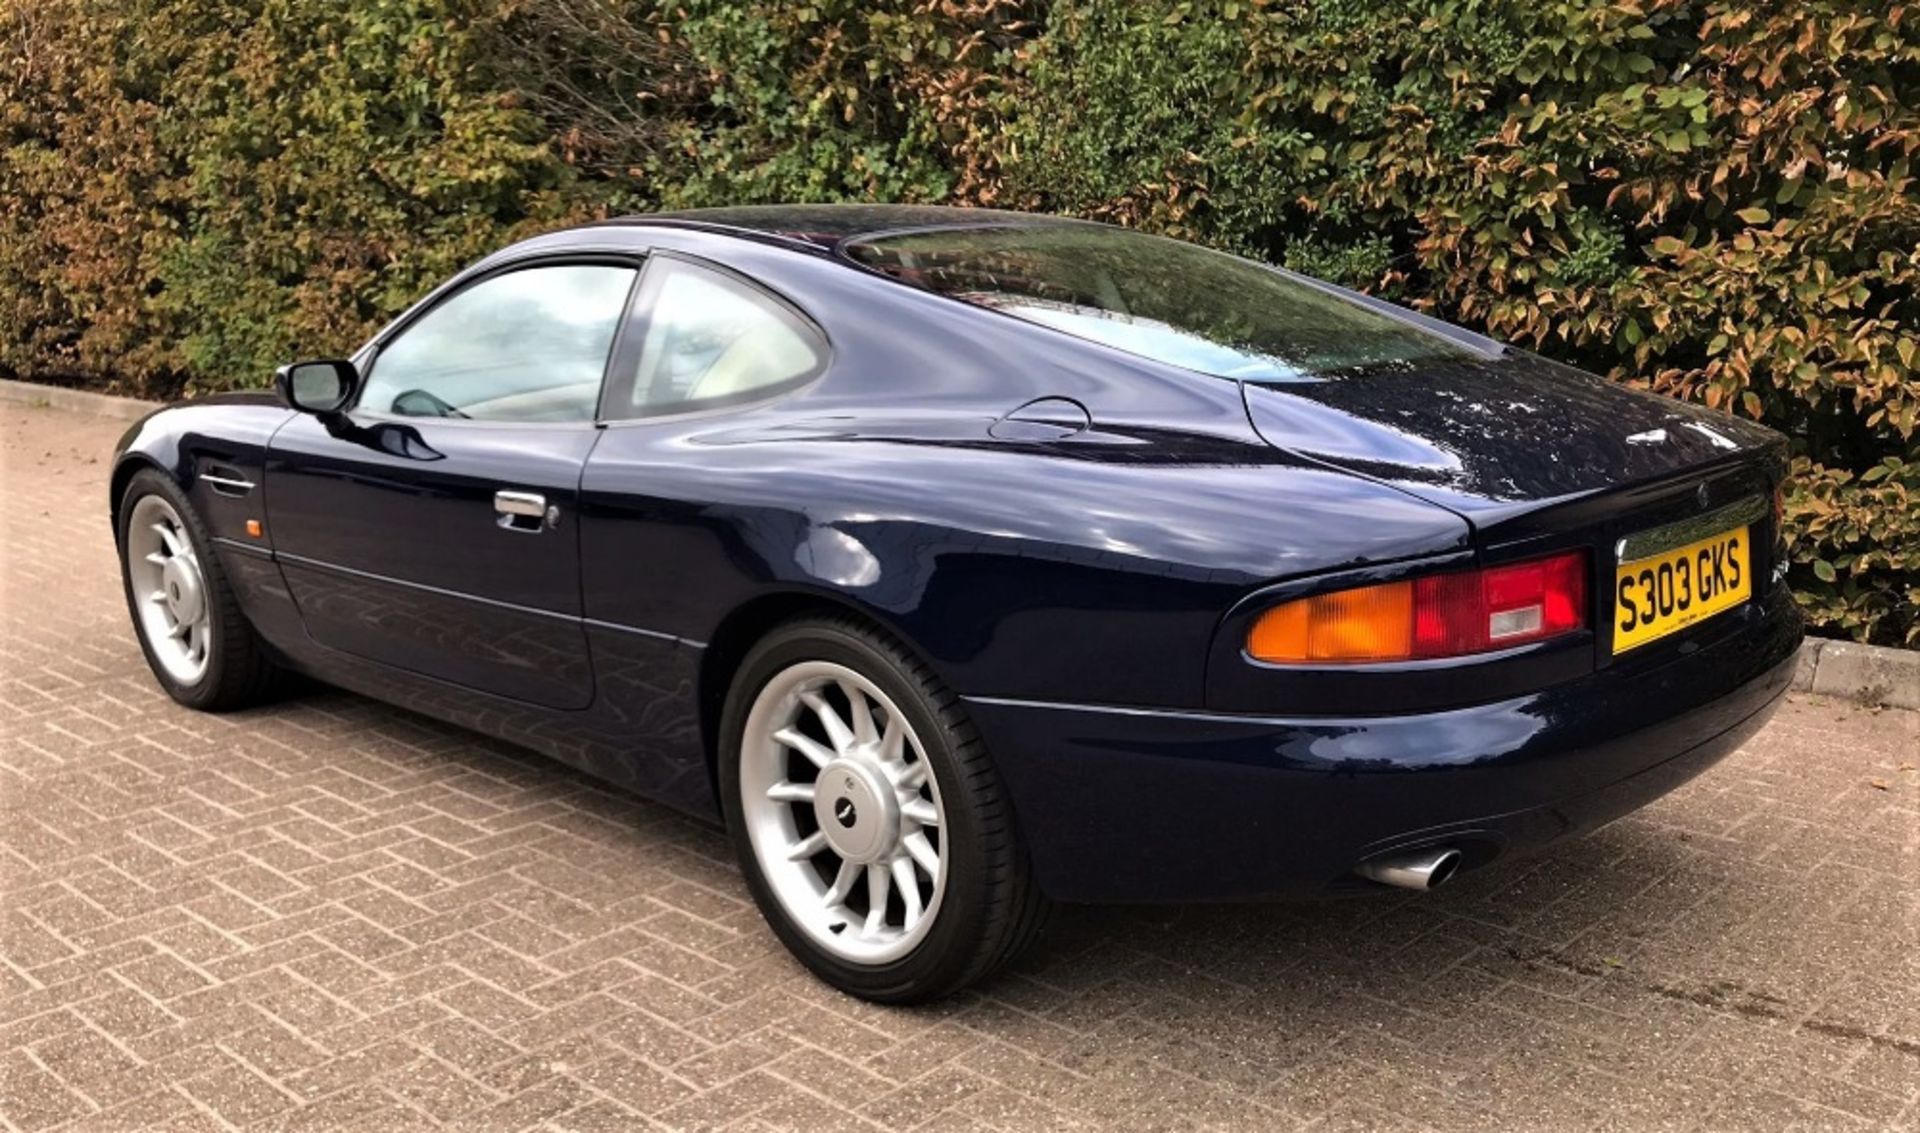 1998 ASTON-MARTIN DB7 COUPE Registration Number: S303 GKS Chassis Number: SCFAA1110WK102251 Recorded - Image 2 of 16